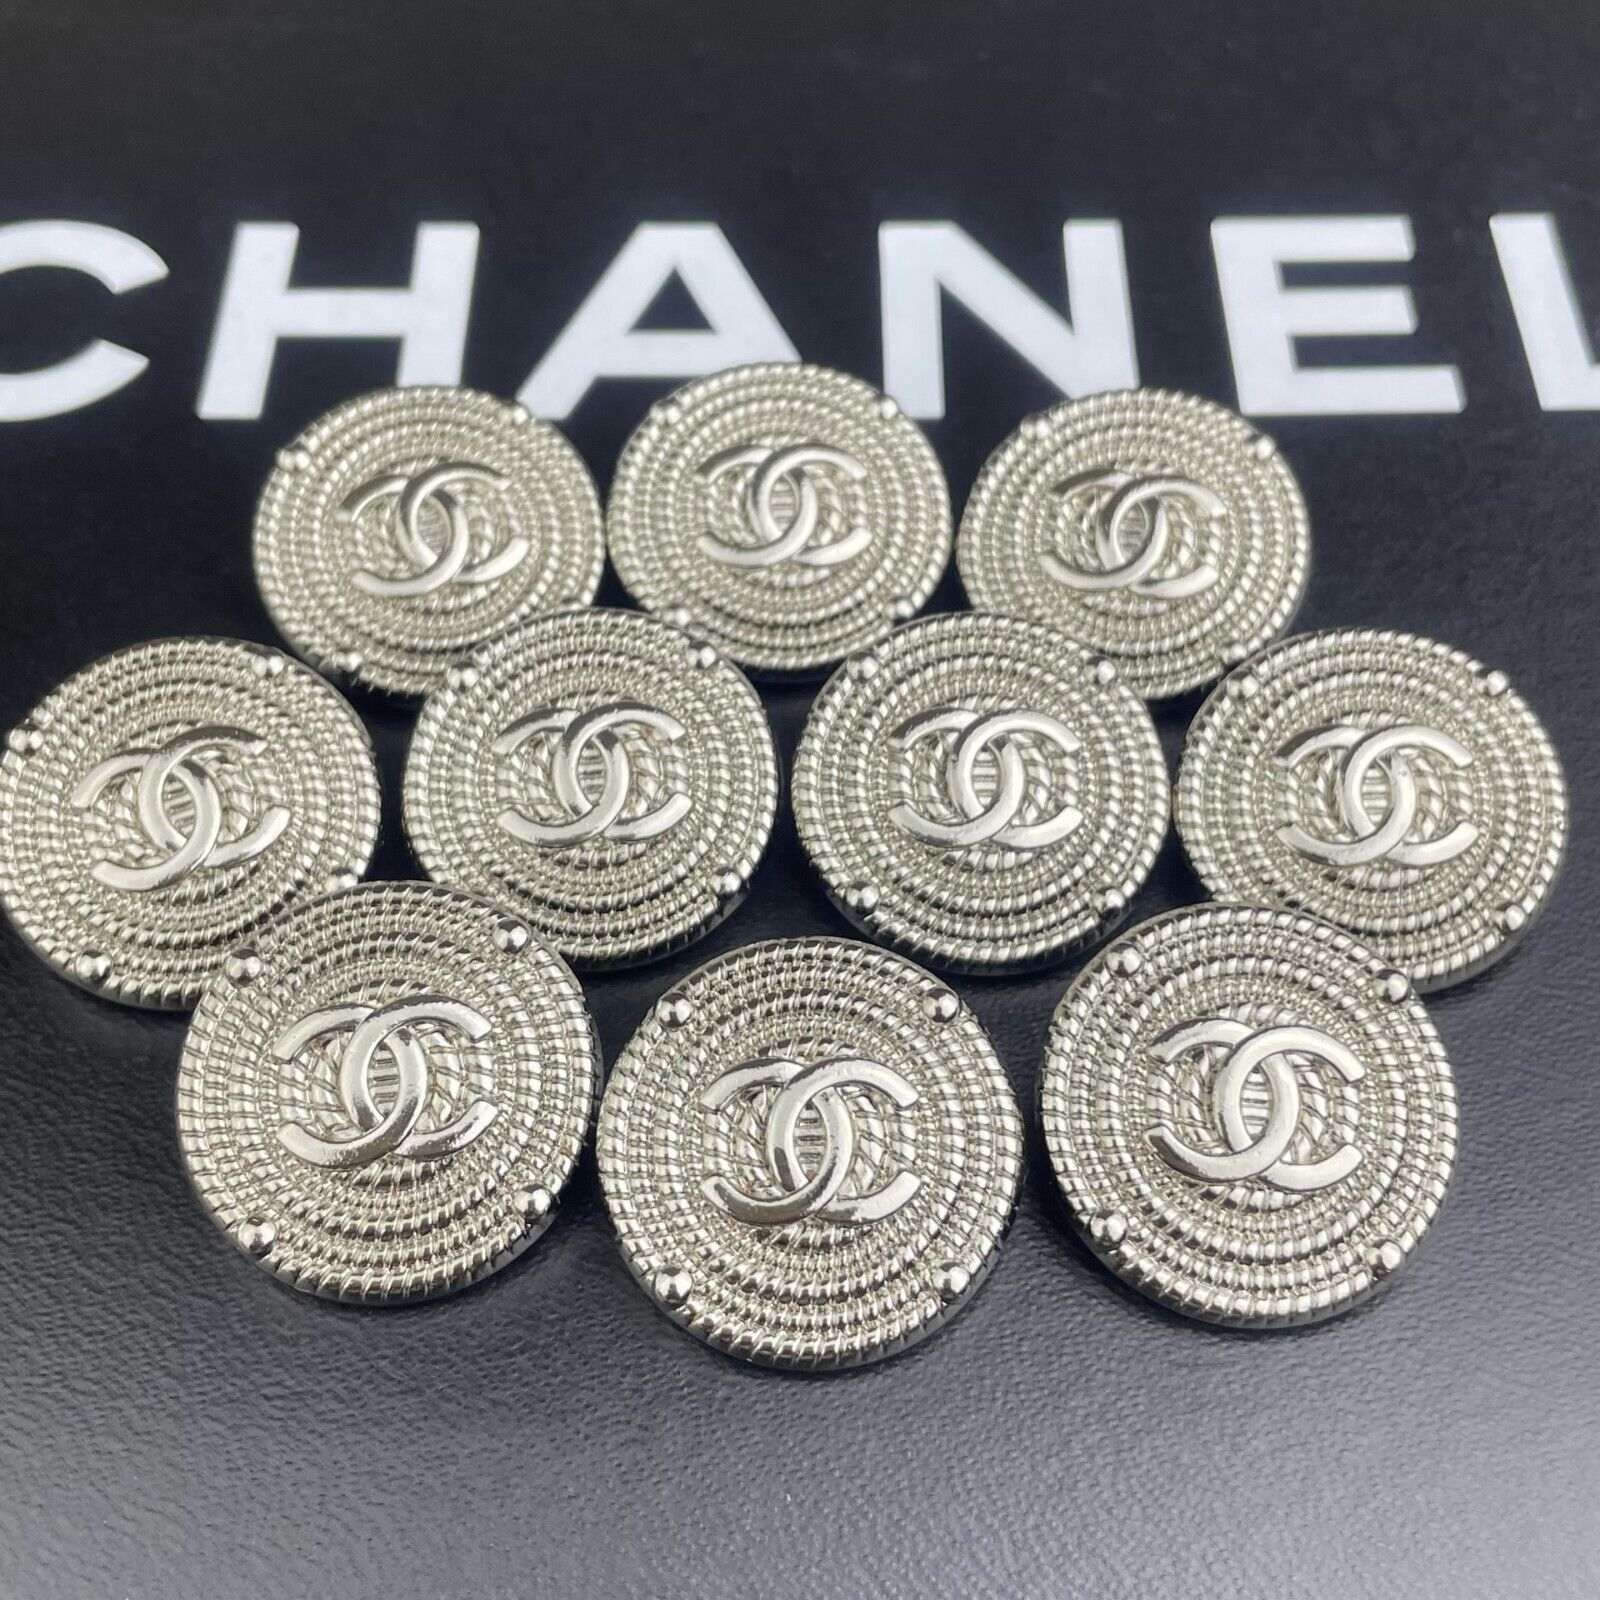 10 CHANEL BUTTONS CC LOGO ROUND SILVER METAL 25MM VINTAGE